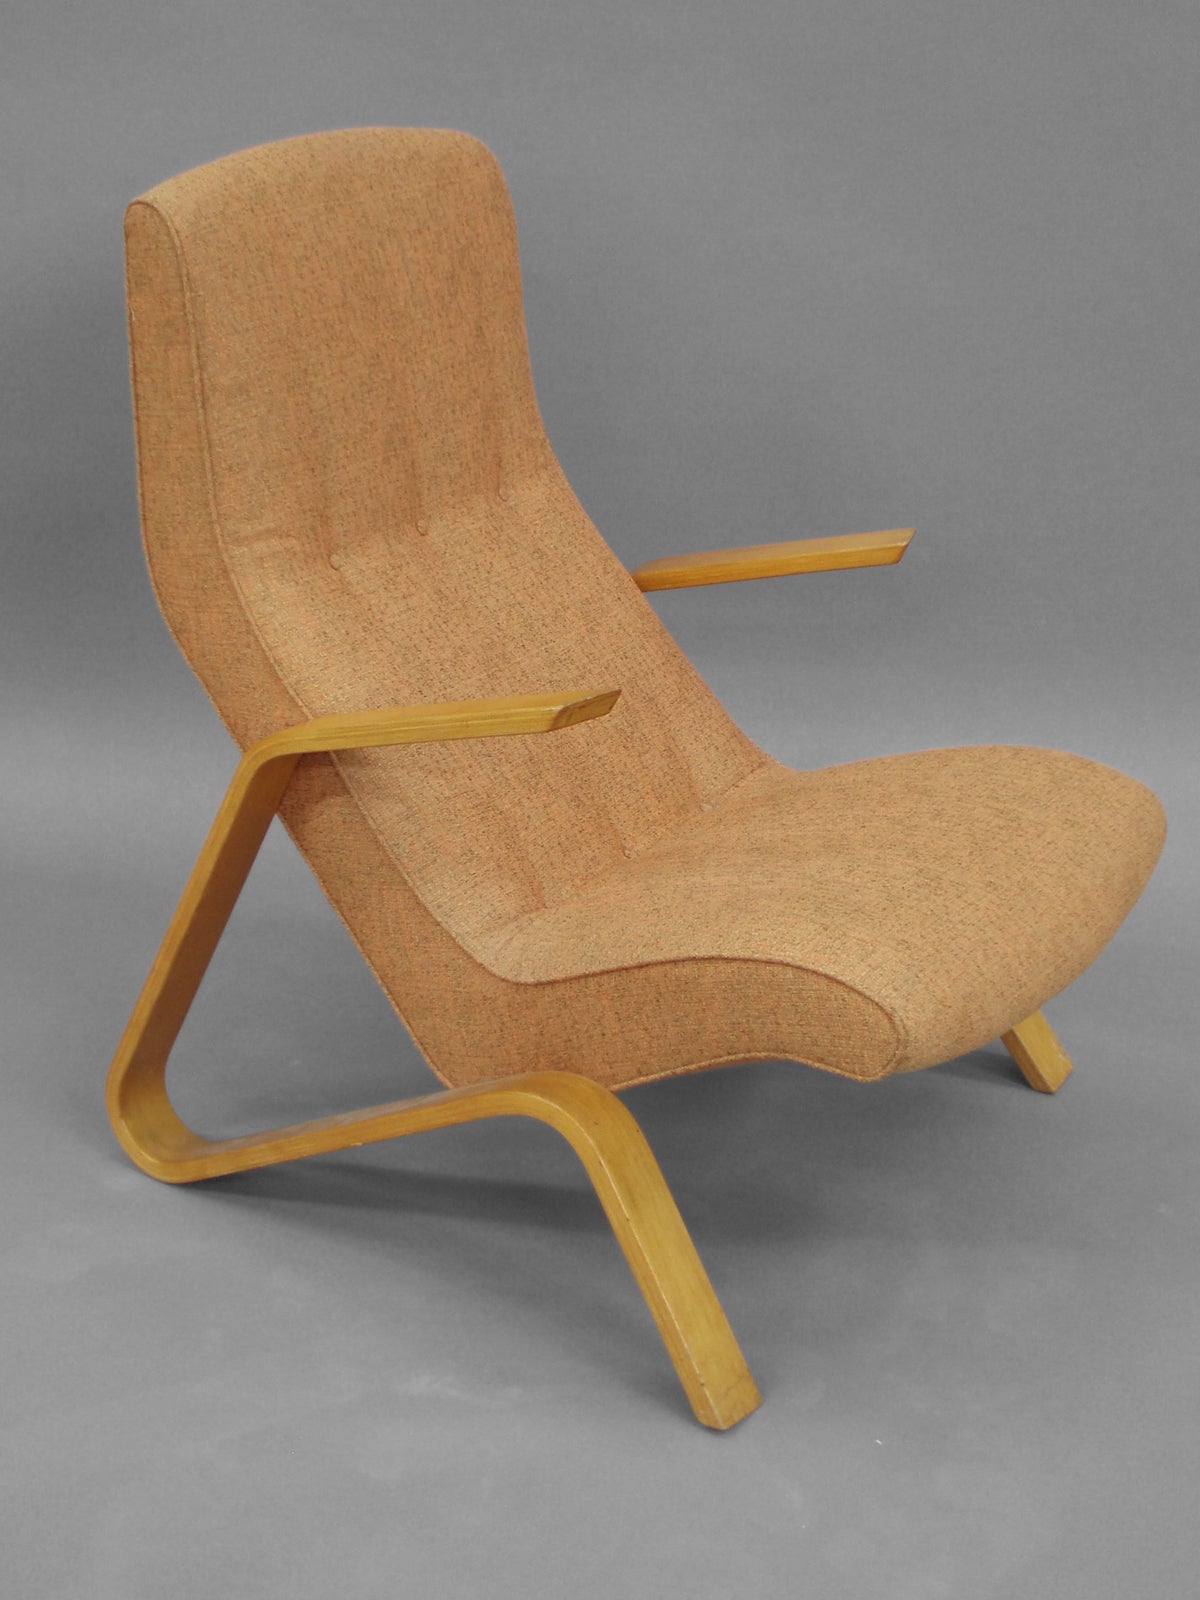 Early Production Grasshopper Chair by Eero Saarinen for Knoll